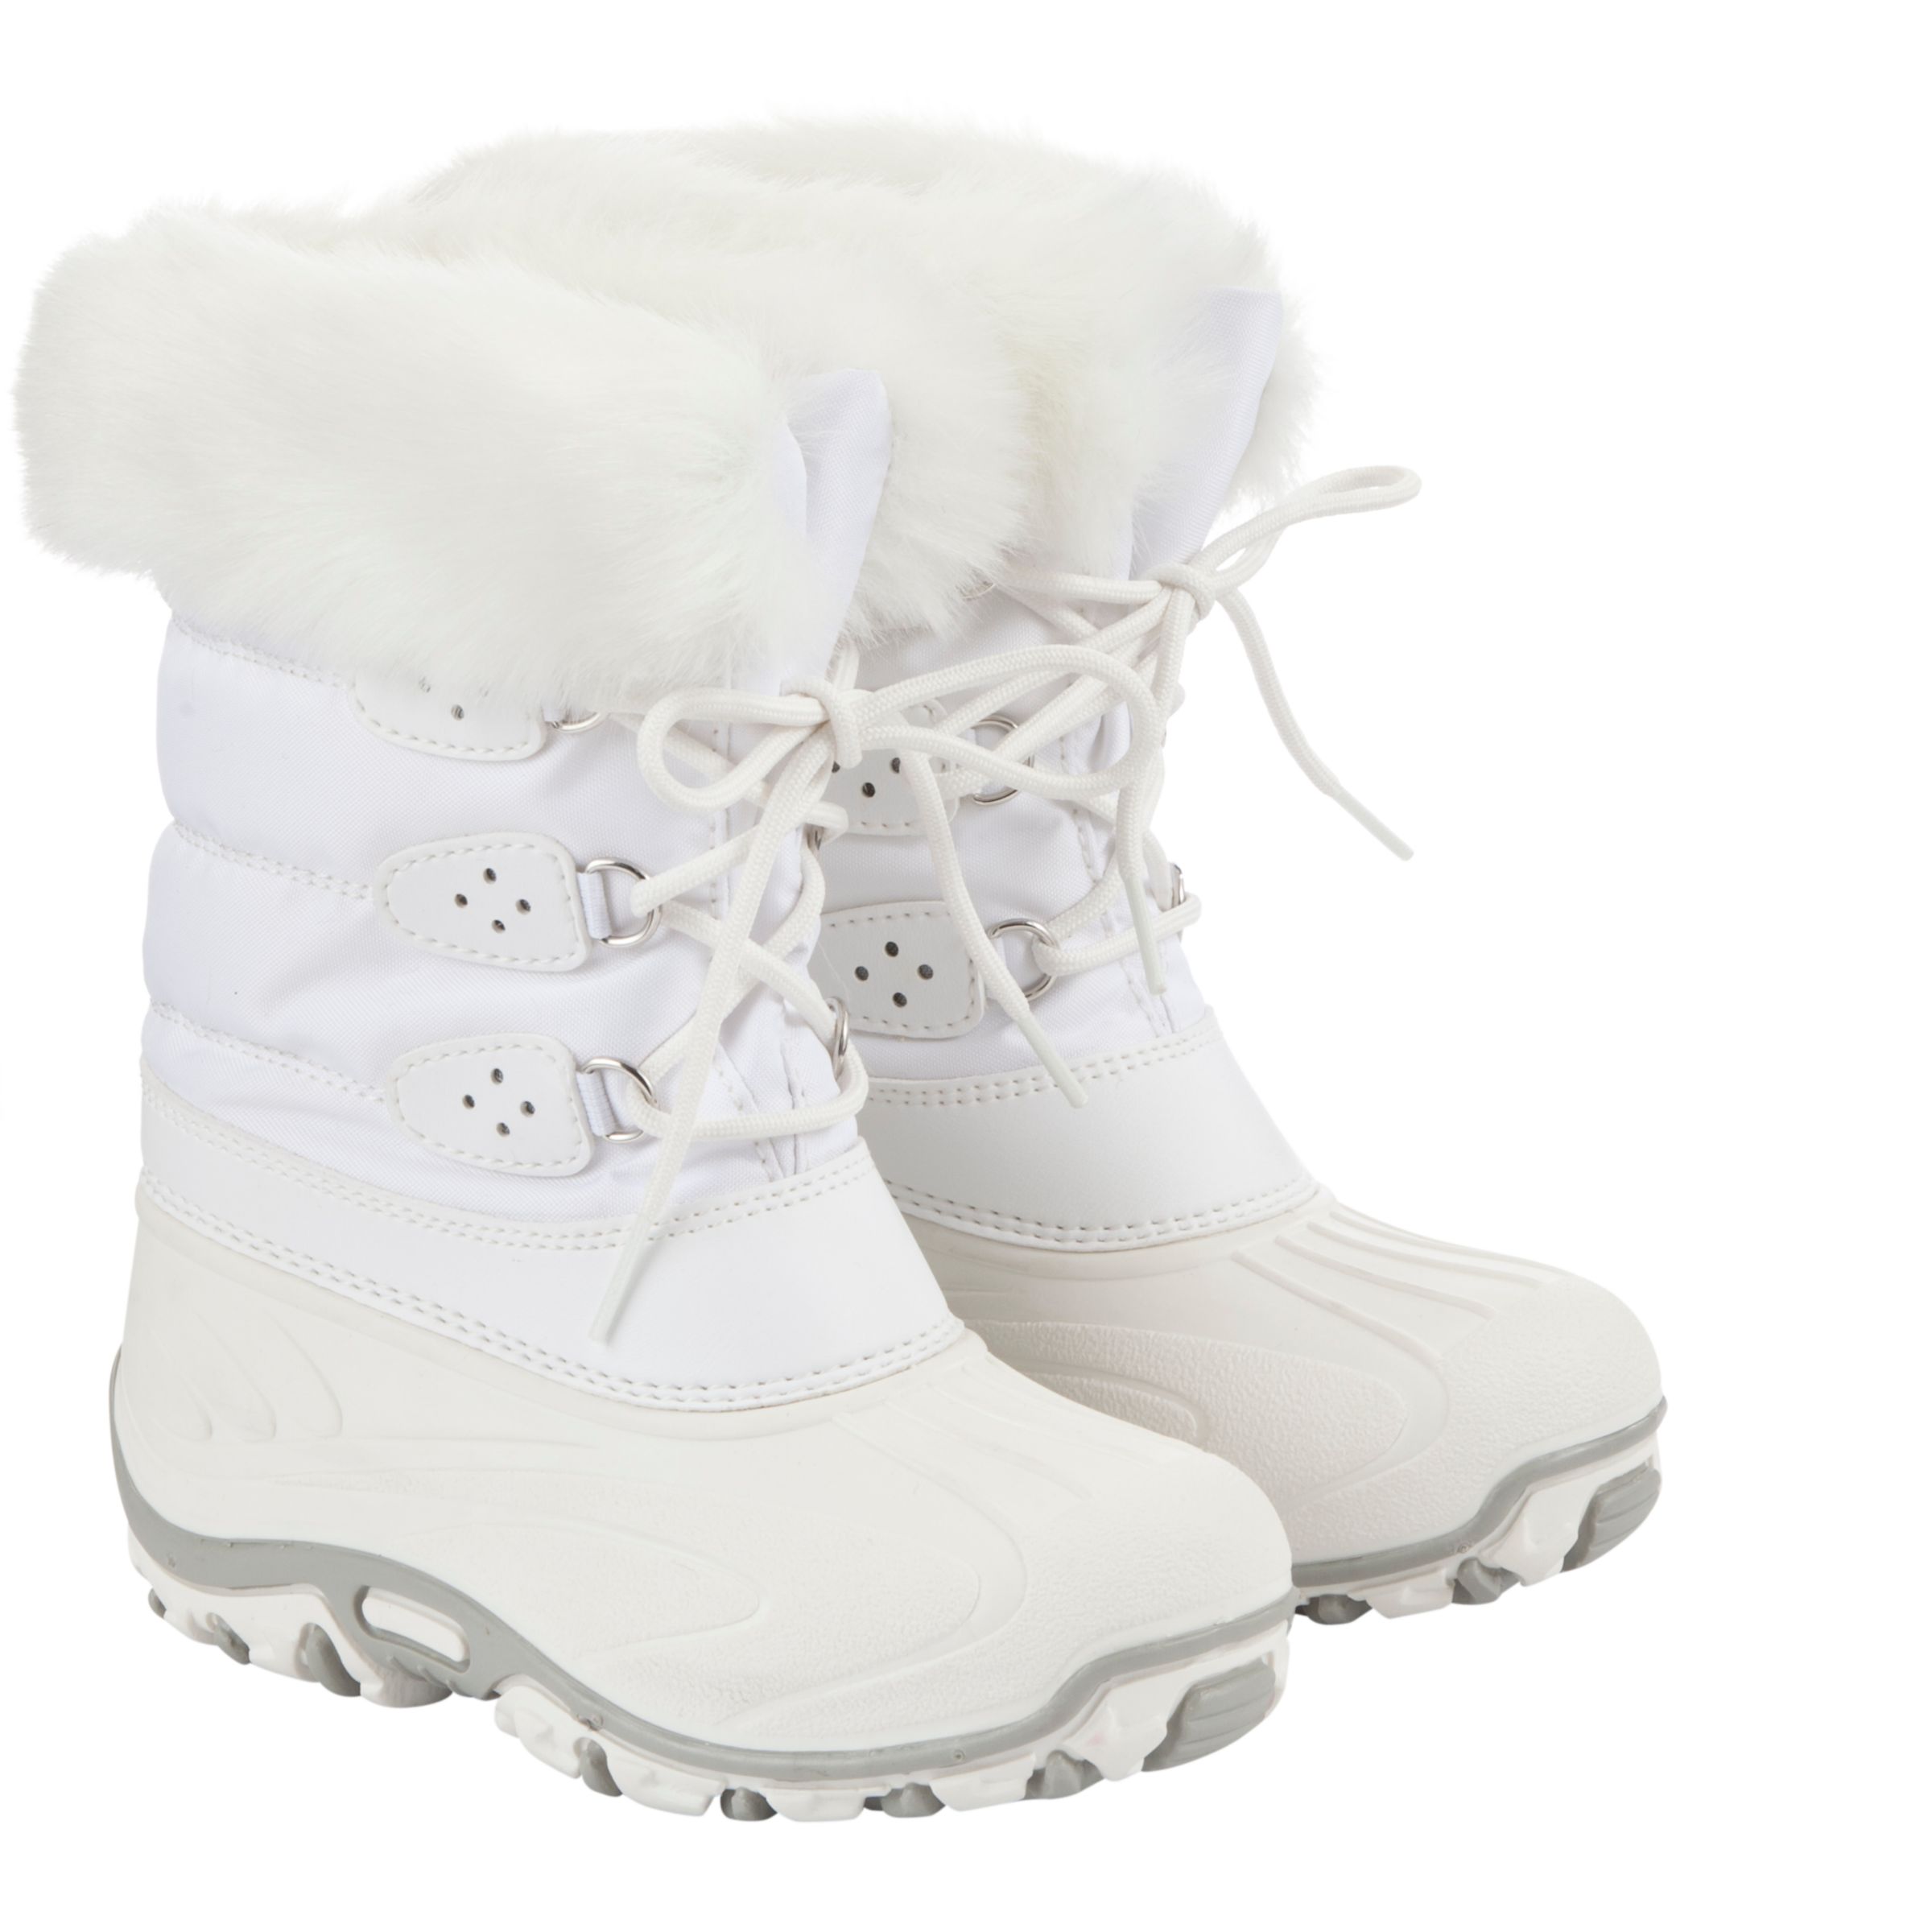 white snow boots with fur